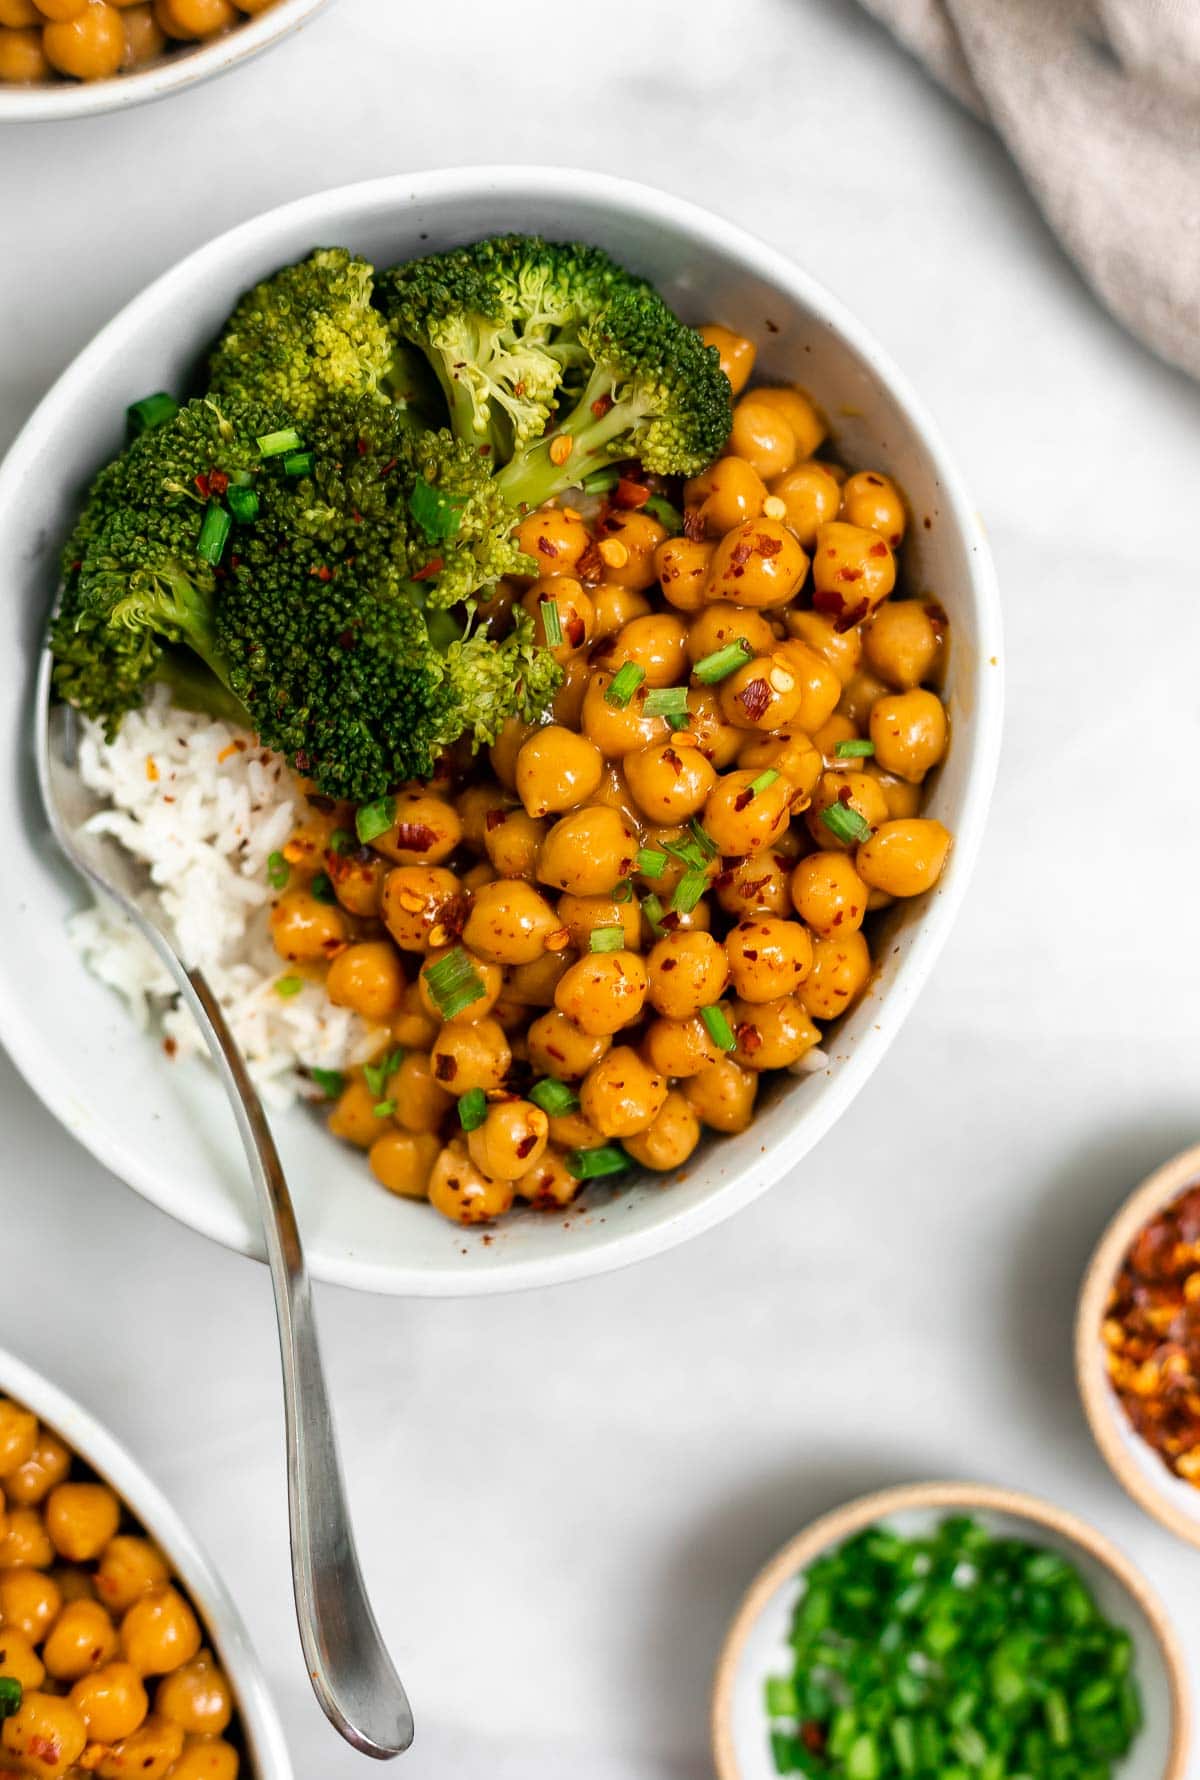 Orange chickpeas in a bowl with broccoli and rice.